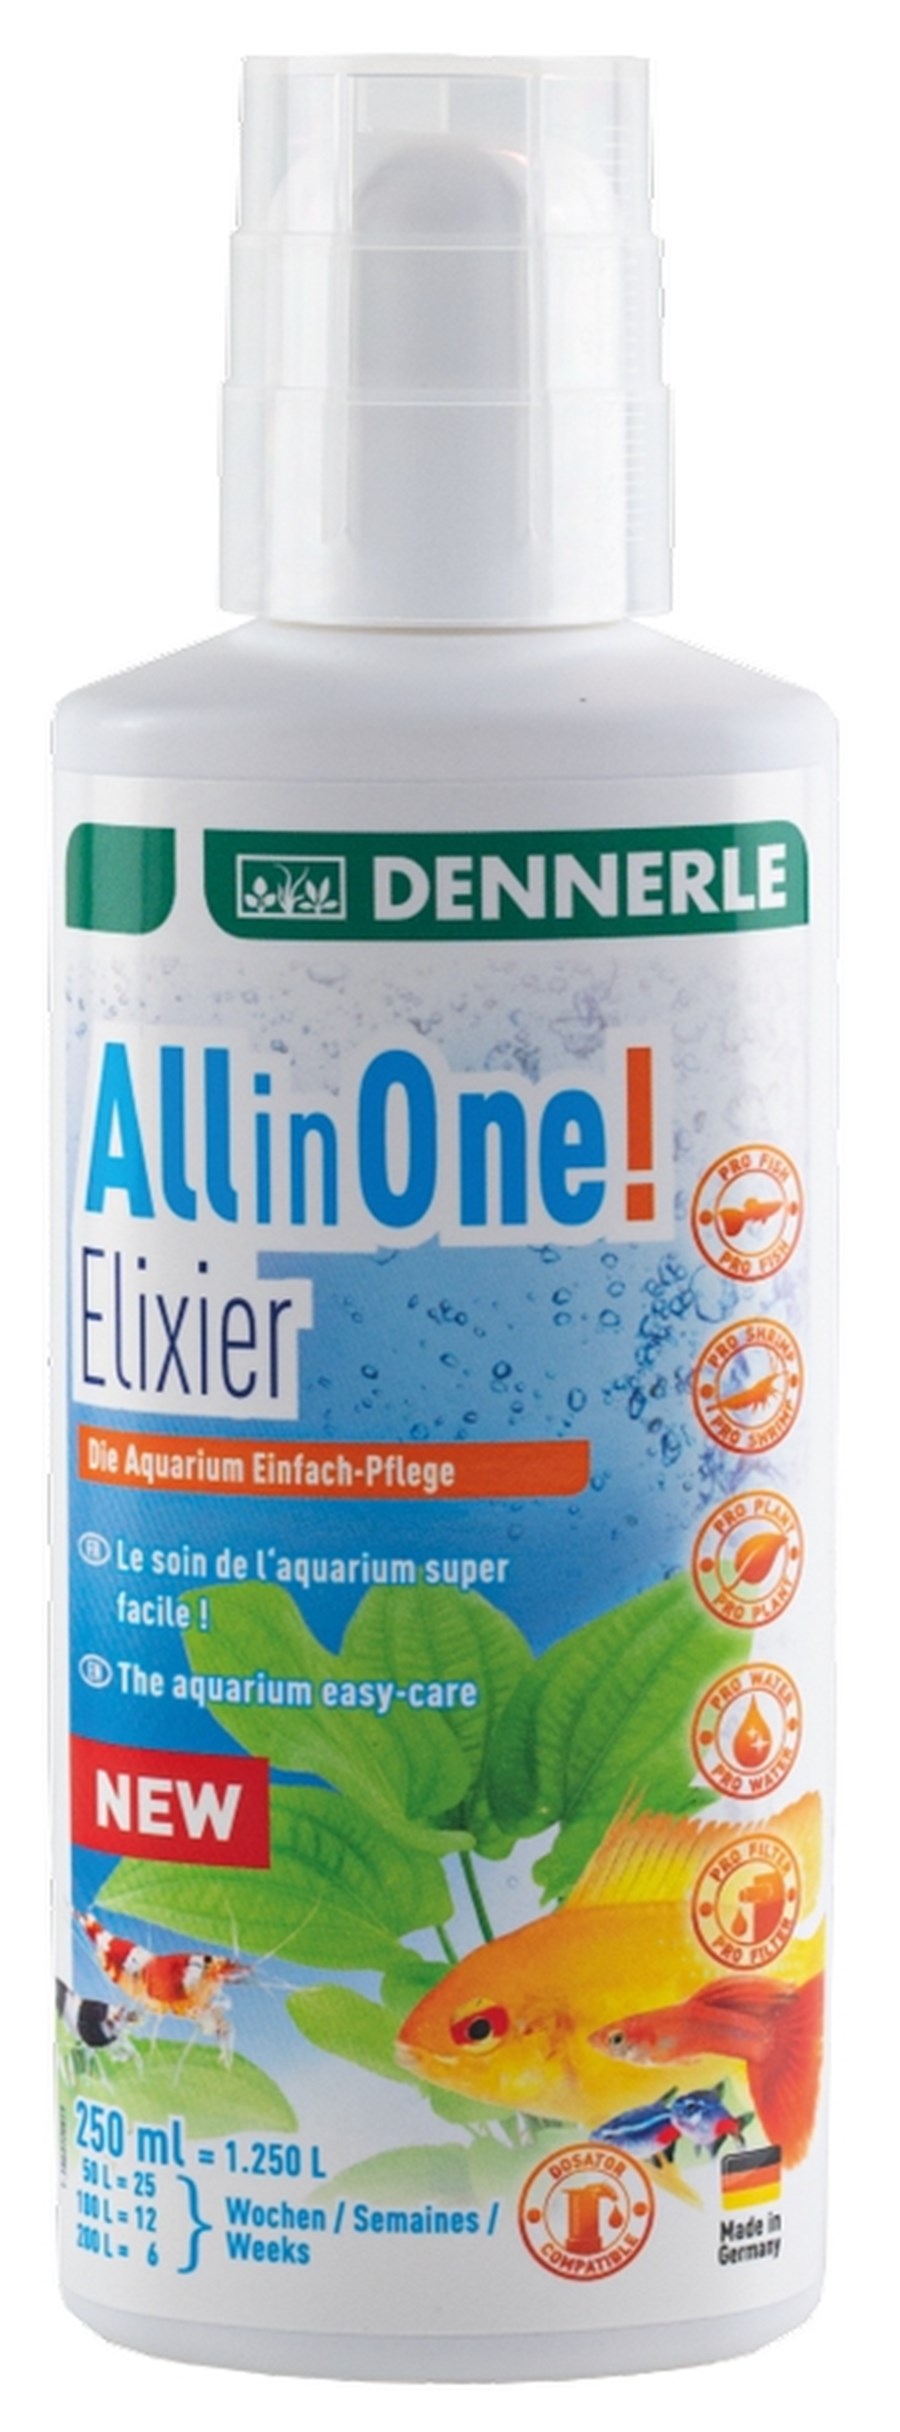 All in One! Elixier 500ml